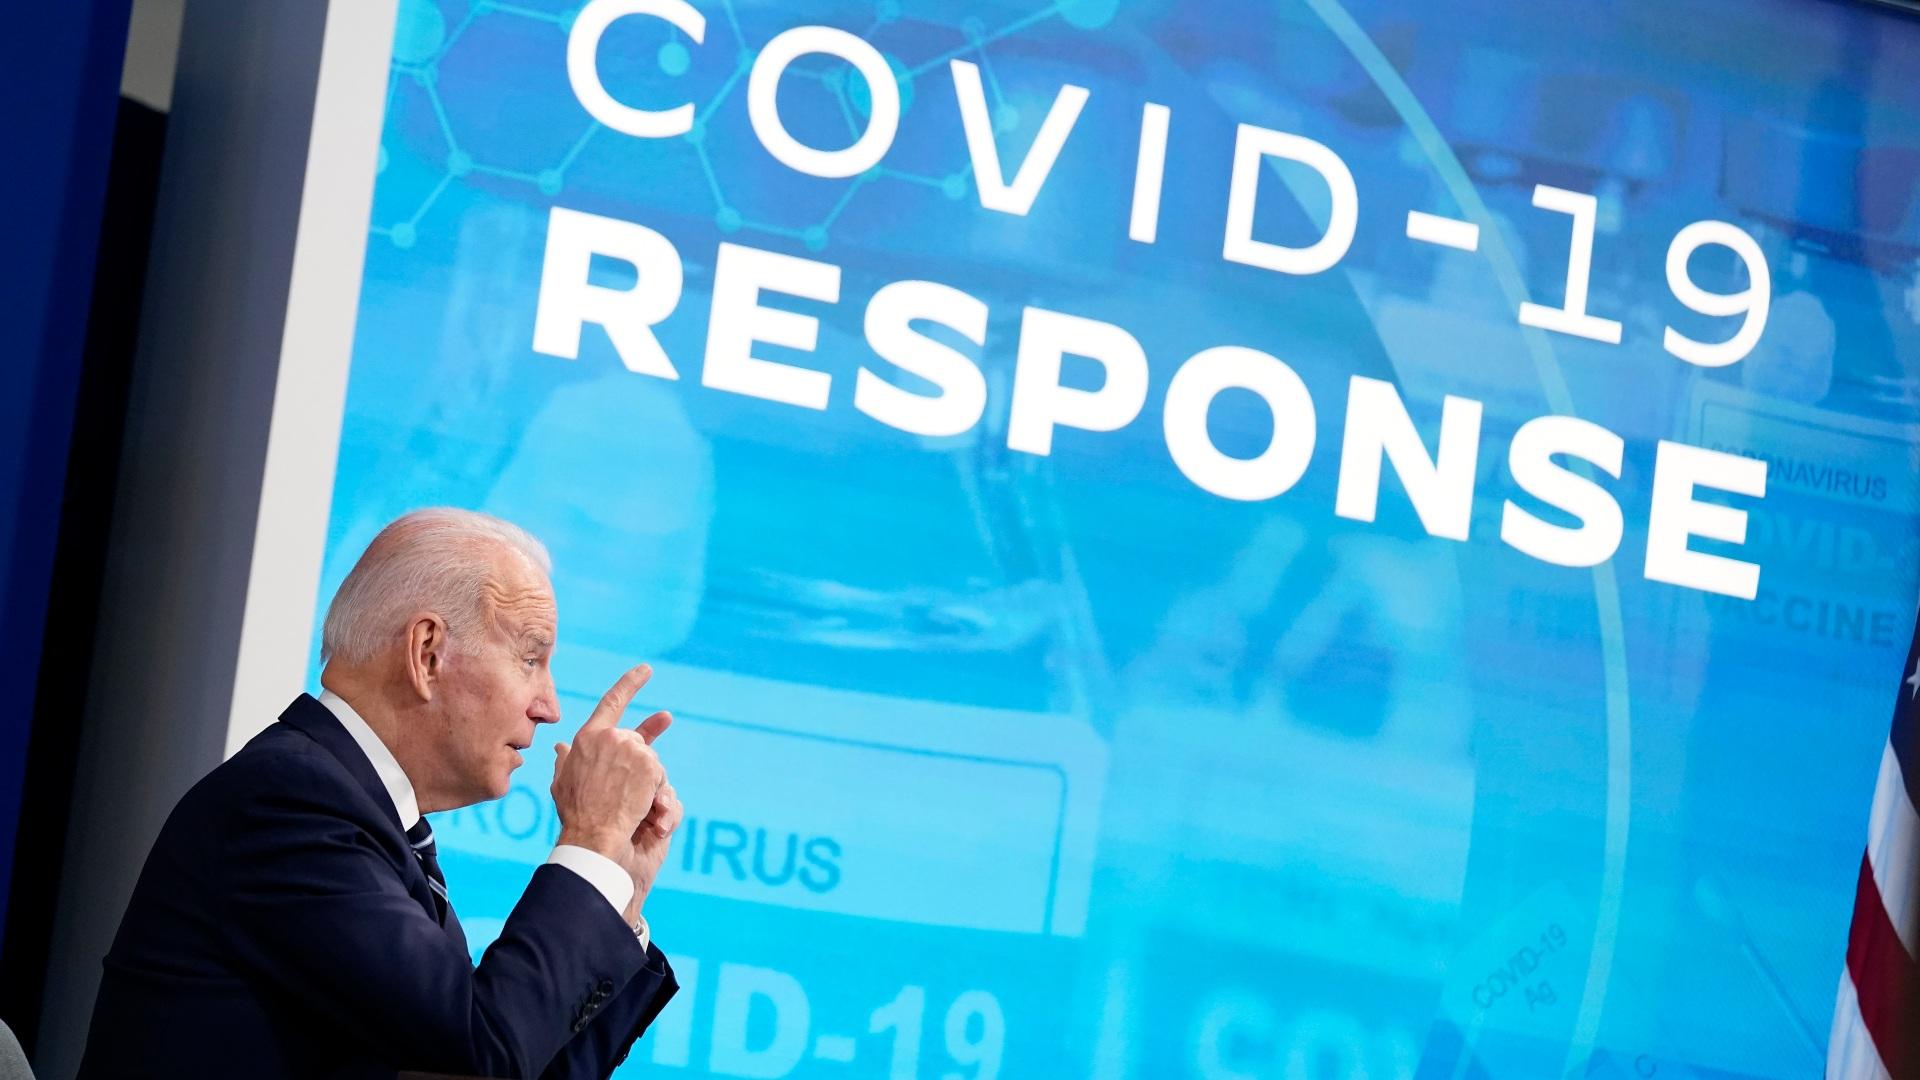 President Joe Biden speaks about the government’s COVID-19 response, in the South Court Auditorium in the Eisenhower Executive Office Building on the White House Campus in Washington, Thursday, Jan. 13, 2022. (AP Photo / Andrew Harnik)